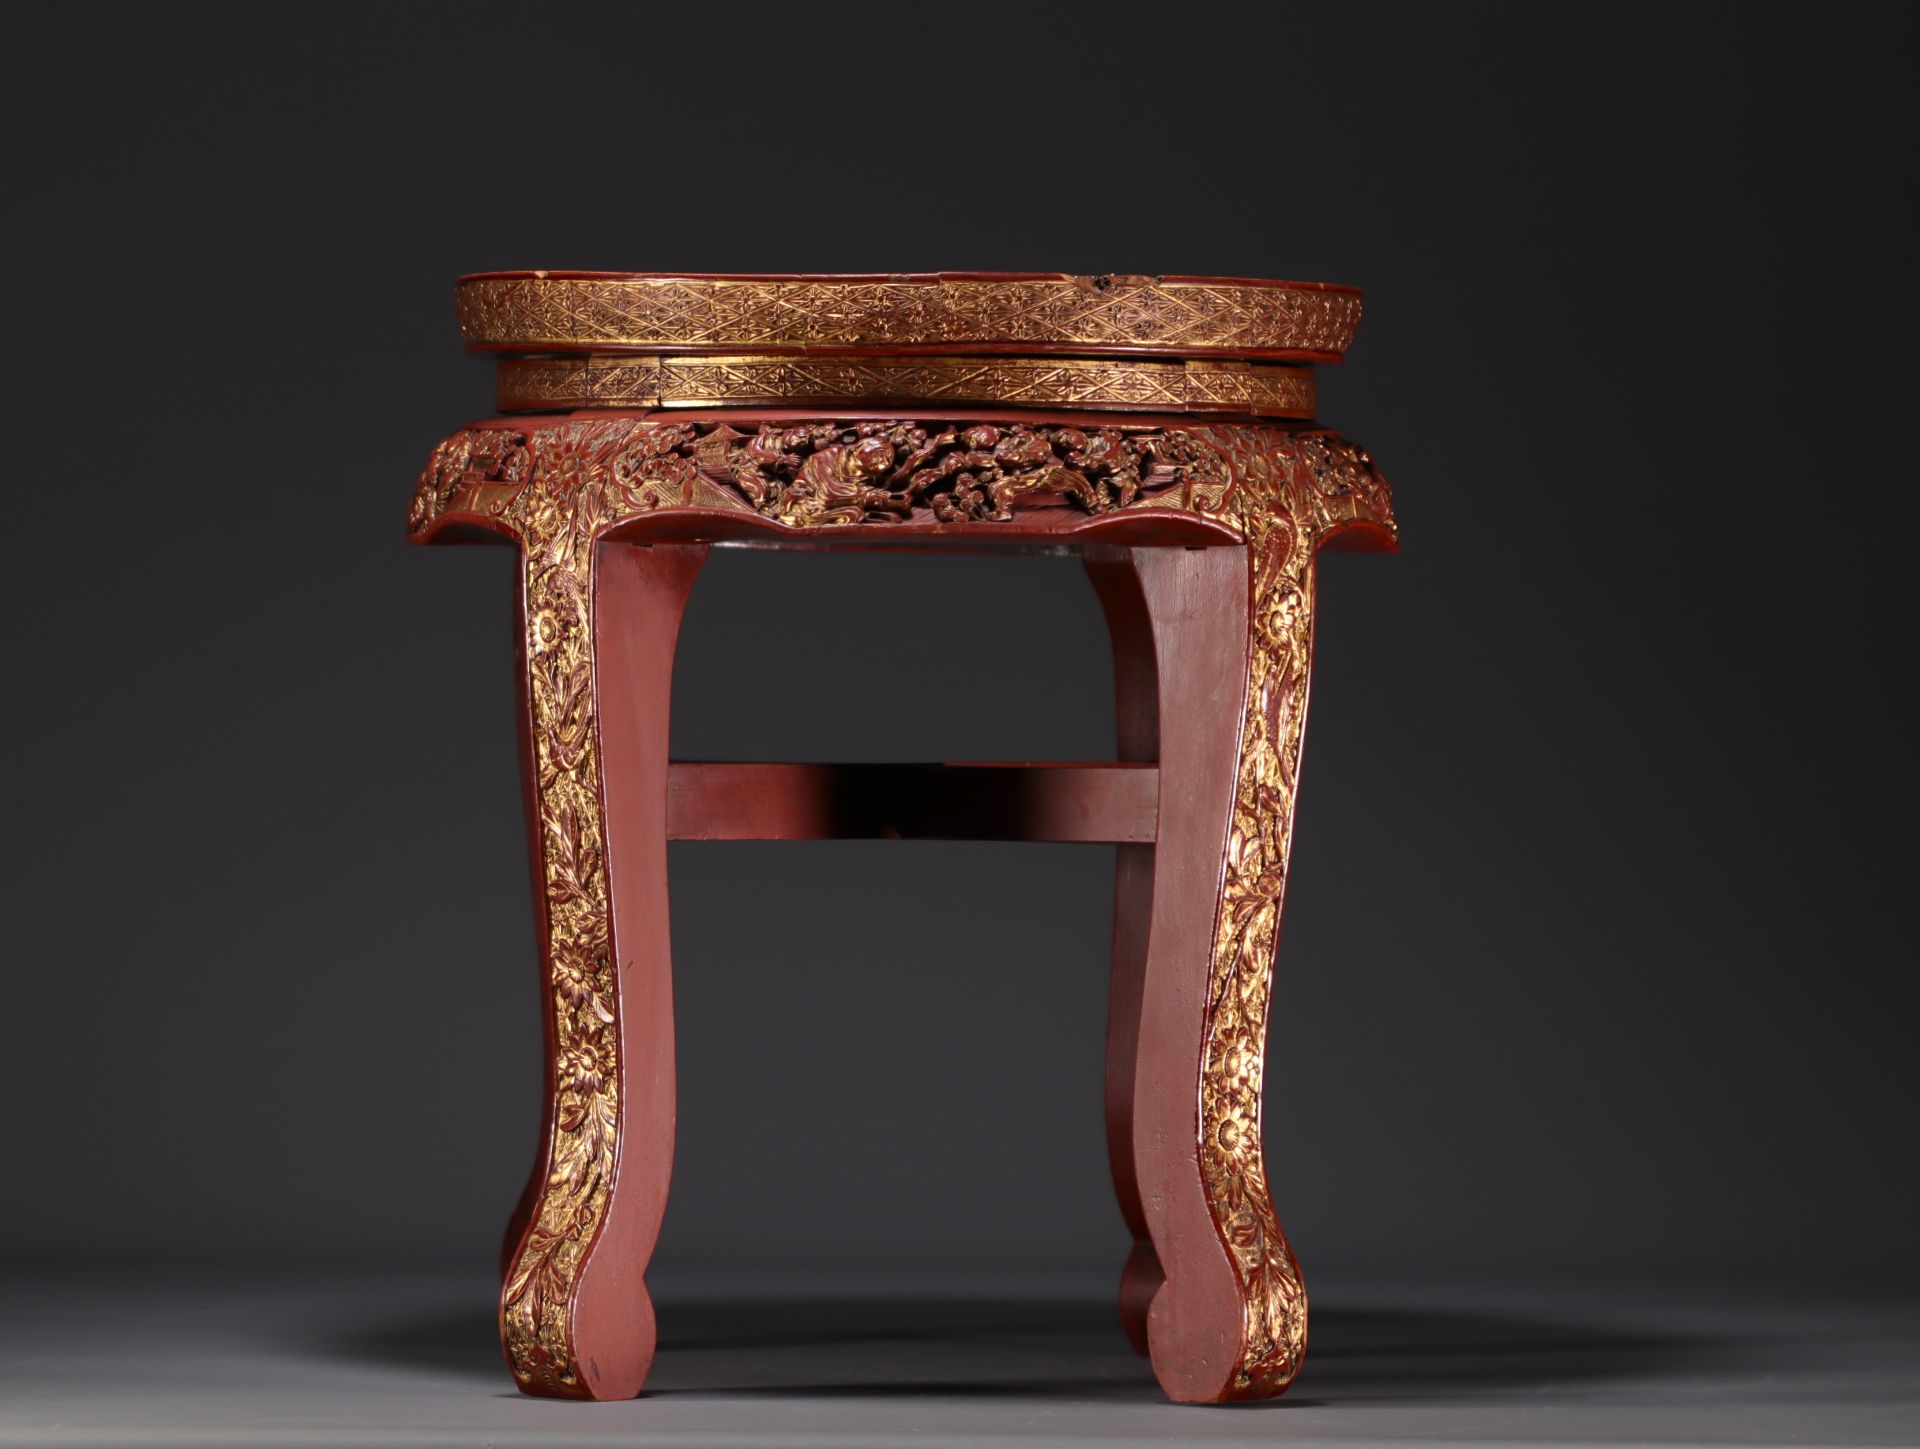 China - Small red and gold lacquer side table with carved figures and floral motifs, late 19th centu - Image 3 of 4